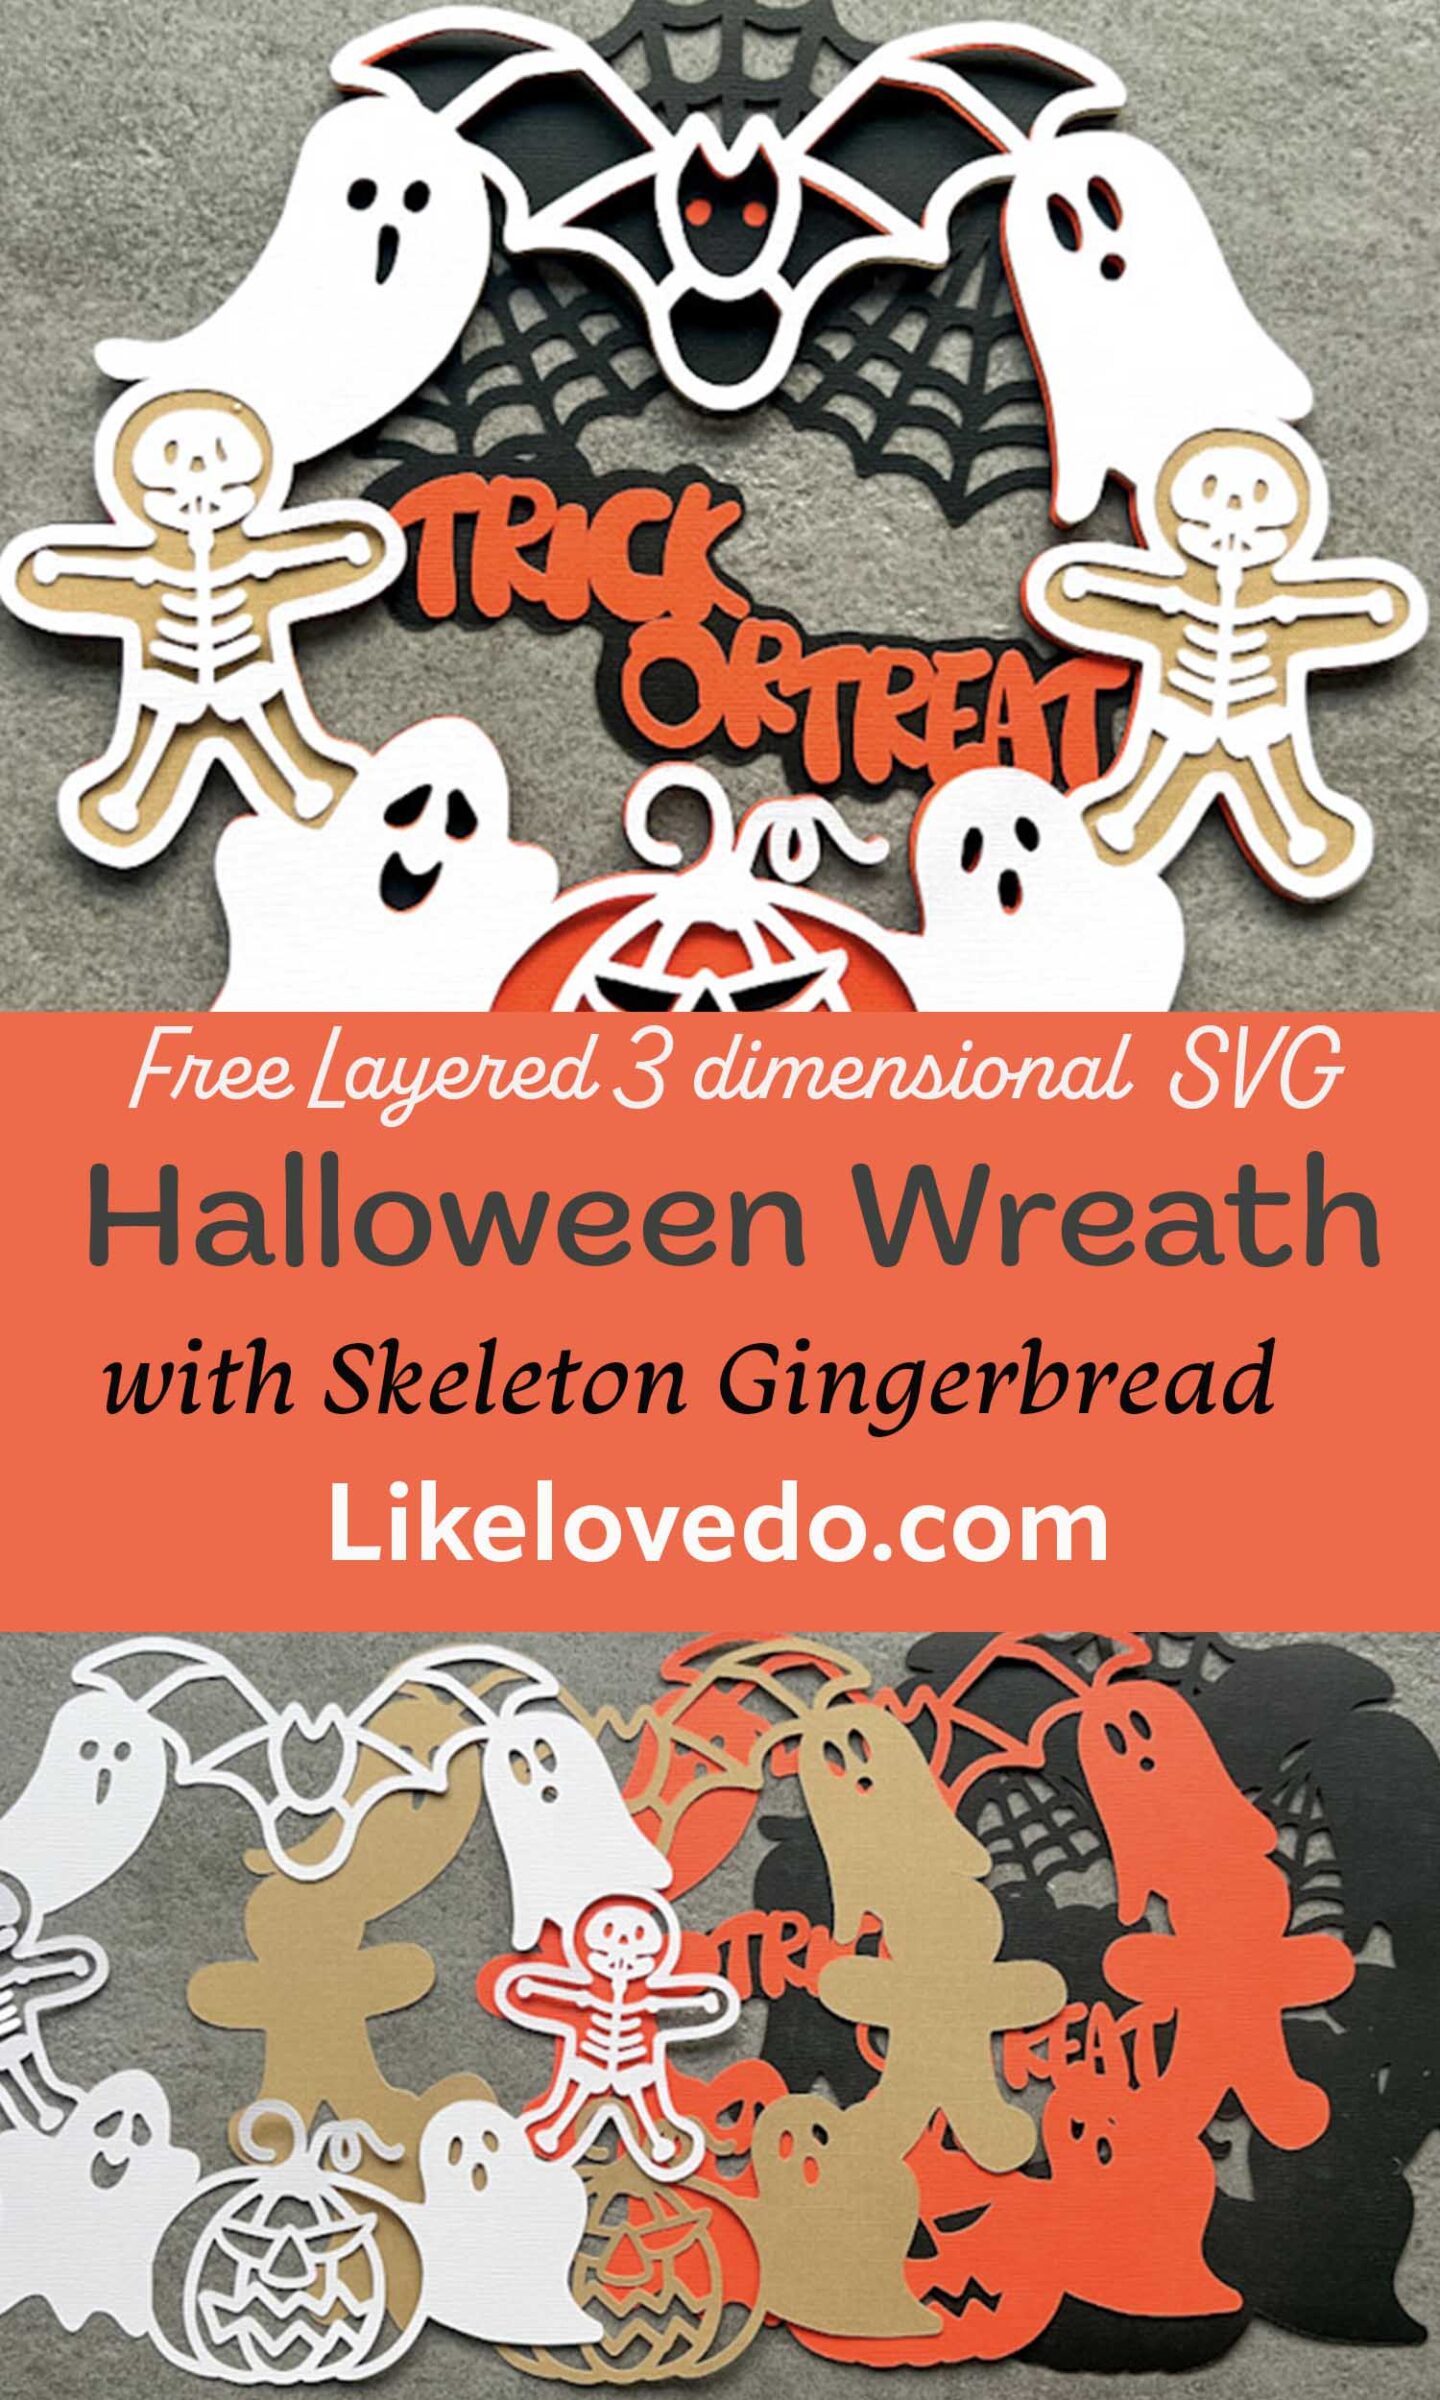 Free Layered Halloween Gingerbread Wreath. In 4 layers with Skeleton Gingerbread men